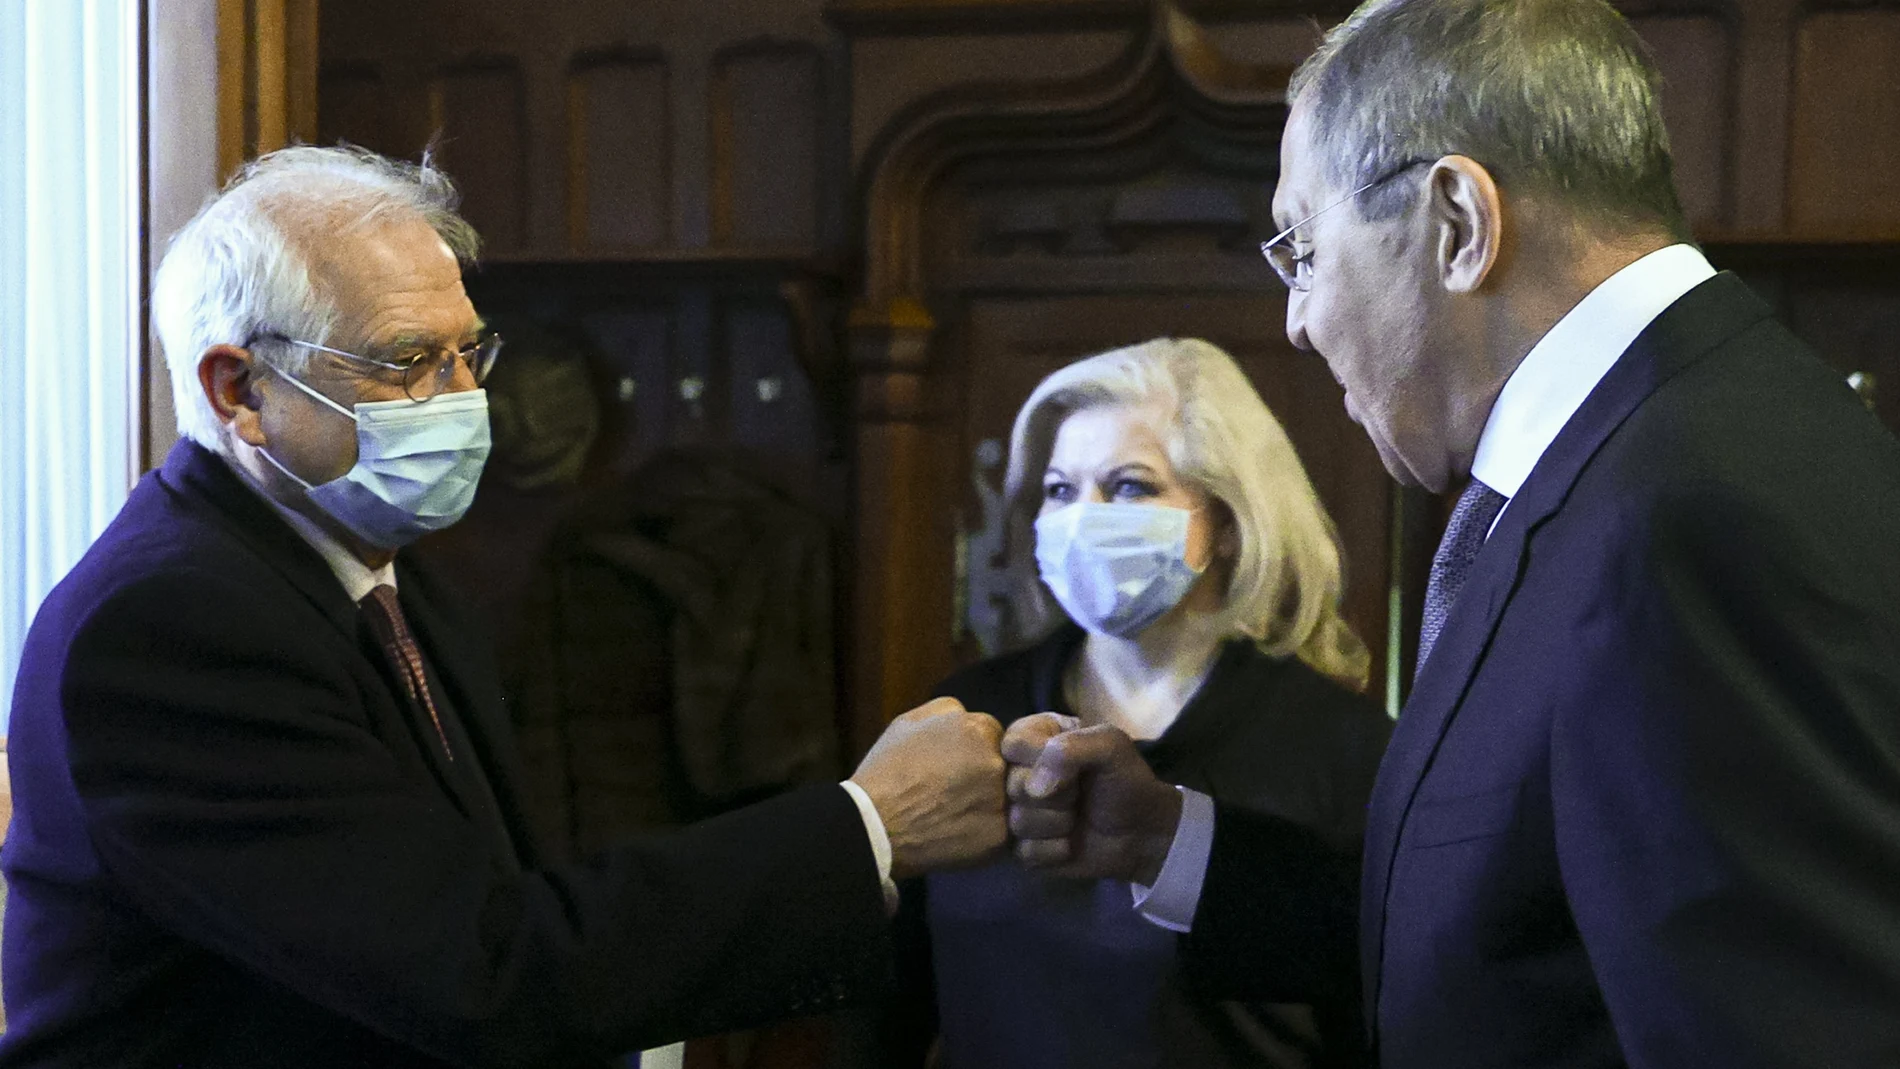 In this photo released by the Russian Foreign Ministry Press Service, Russian Foreign Minister Sergey Lavrov, right, and High Representative of the EU for Foreign Affairs and Security Policy Josep Borrell wearing a face mask to protect against coronavirus, greet each other prior to their talks in Moscow, Russia, Friday, Feb. 5, 2021. The European Union's top diplomat expressed hopes Friday that the COVID-19 vaccine developed by Russia will soon be used across the 27-nation bloc. During a visit to Moscow, EU foreign affairs chief Josep Borrell said the Sputnik V vaccine is "good news for the whole mankind." (Russian Foreign Ministry Press Service via AP)